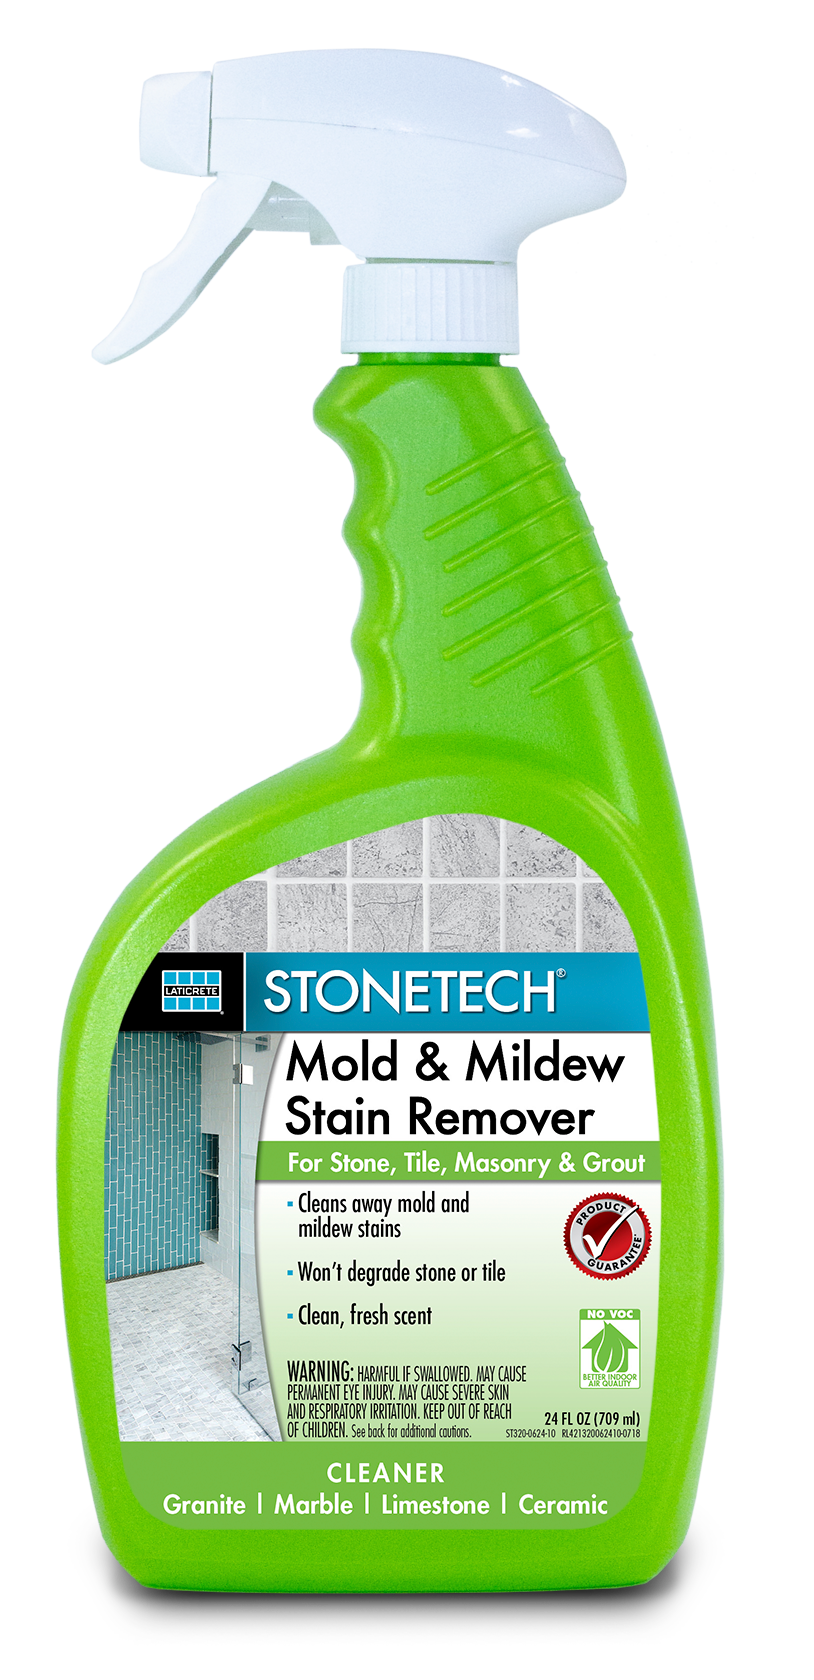 STONETECH Mold Mildew Stain Remover